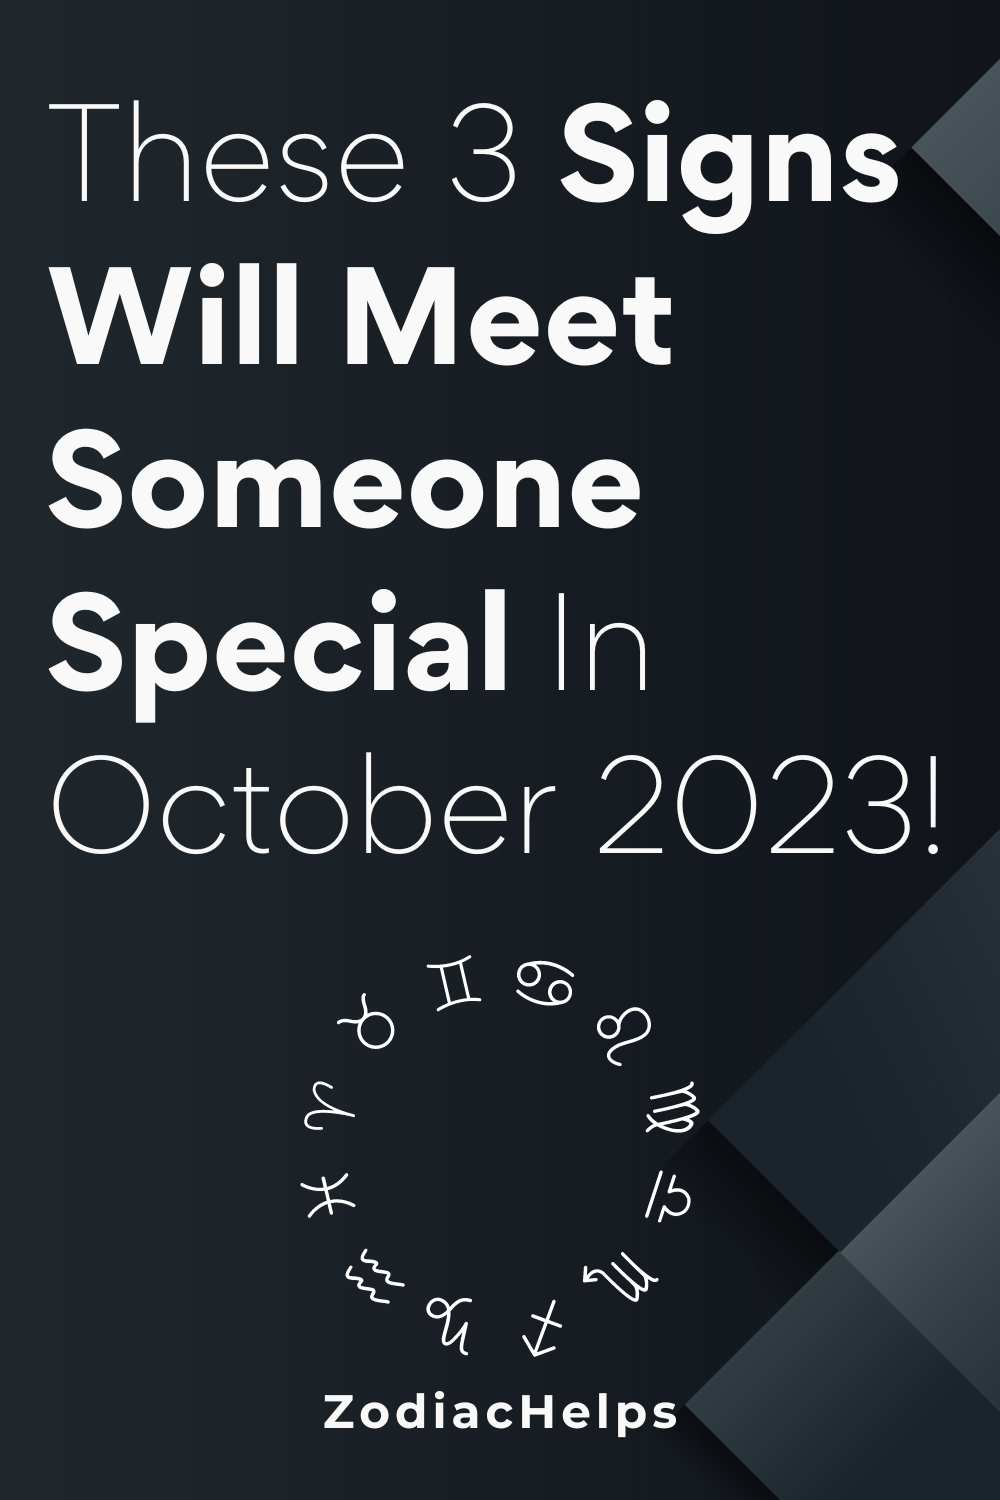 These 3 Signs Will Meet Someone Special In October 2023!